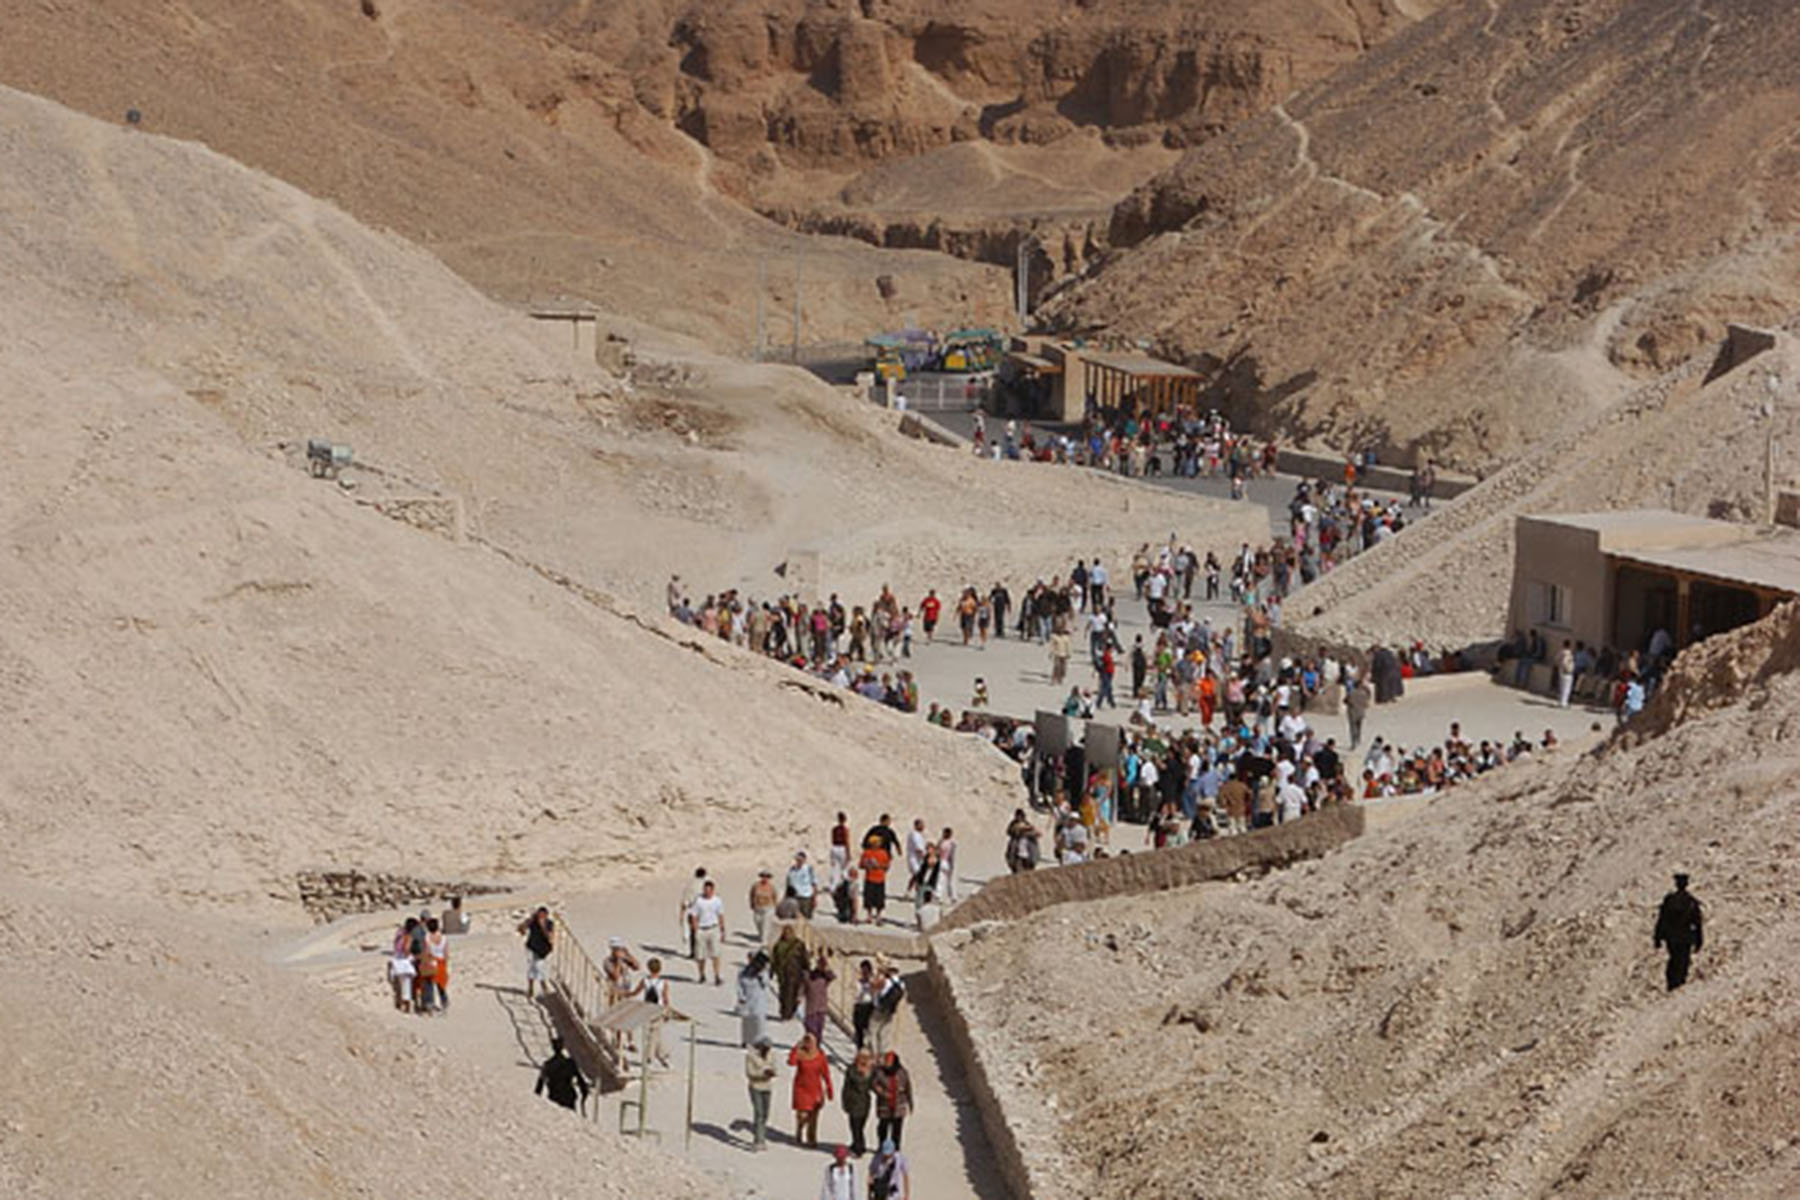 Valley of the Kings (Egypt, 2000 and 2002 Watch): Support from American Express went towards the creation of an integrated site management plan that addressed conservation, tourism management, and research activities at the site. 